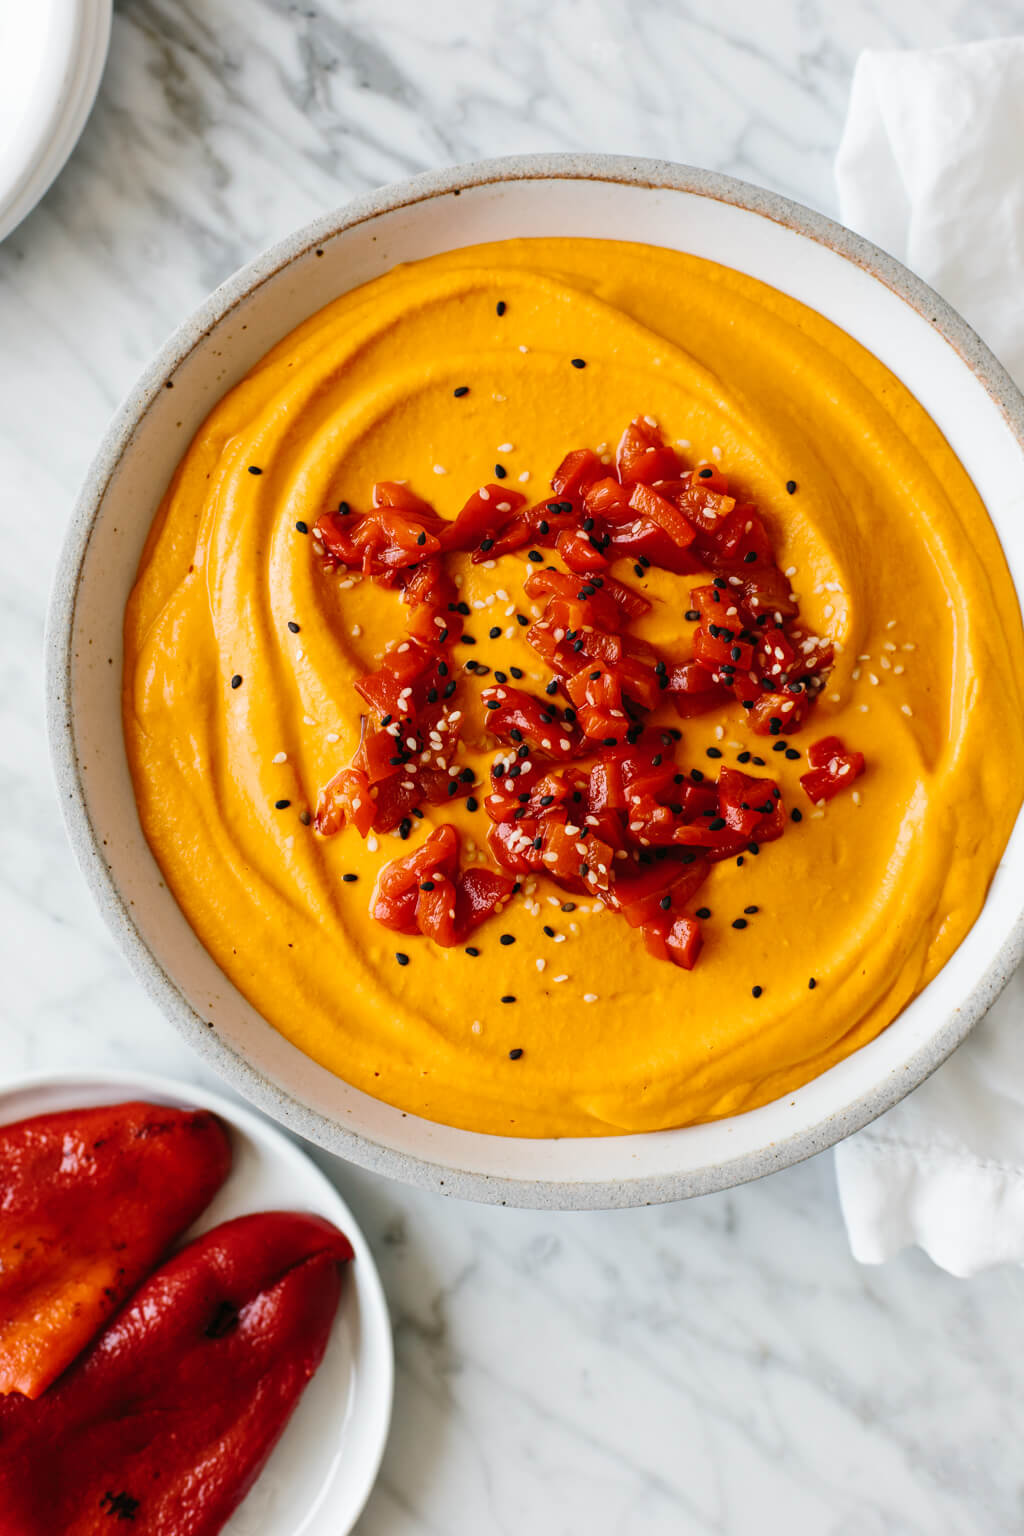 Roasted red pepper hummus in a bowl next to peppers.